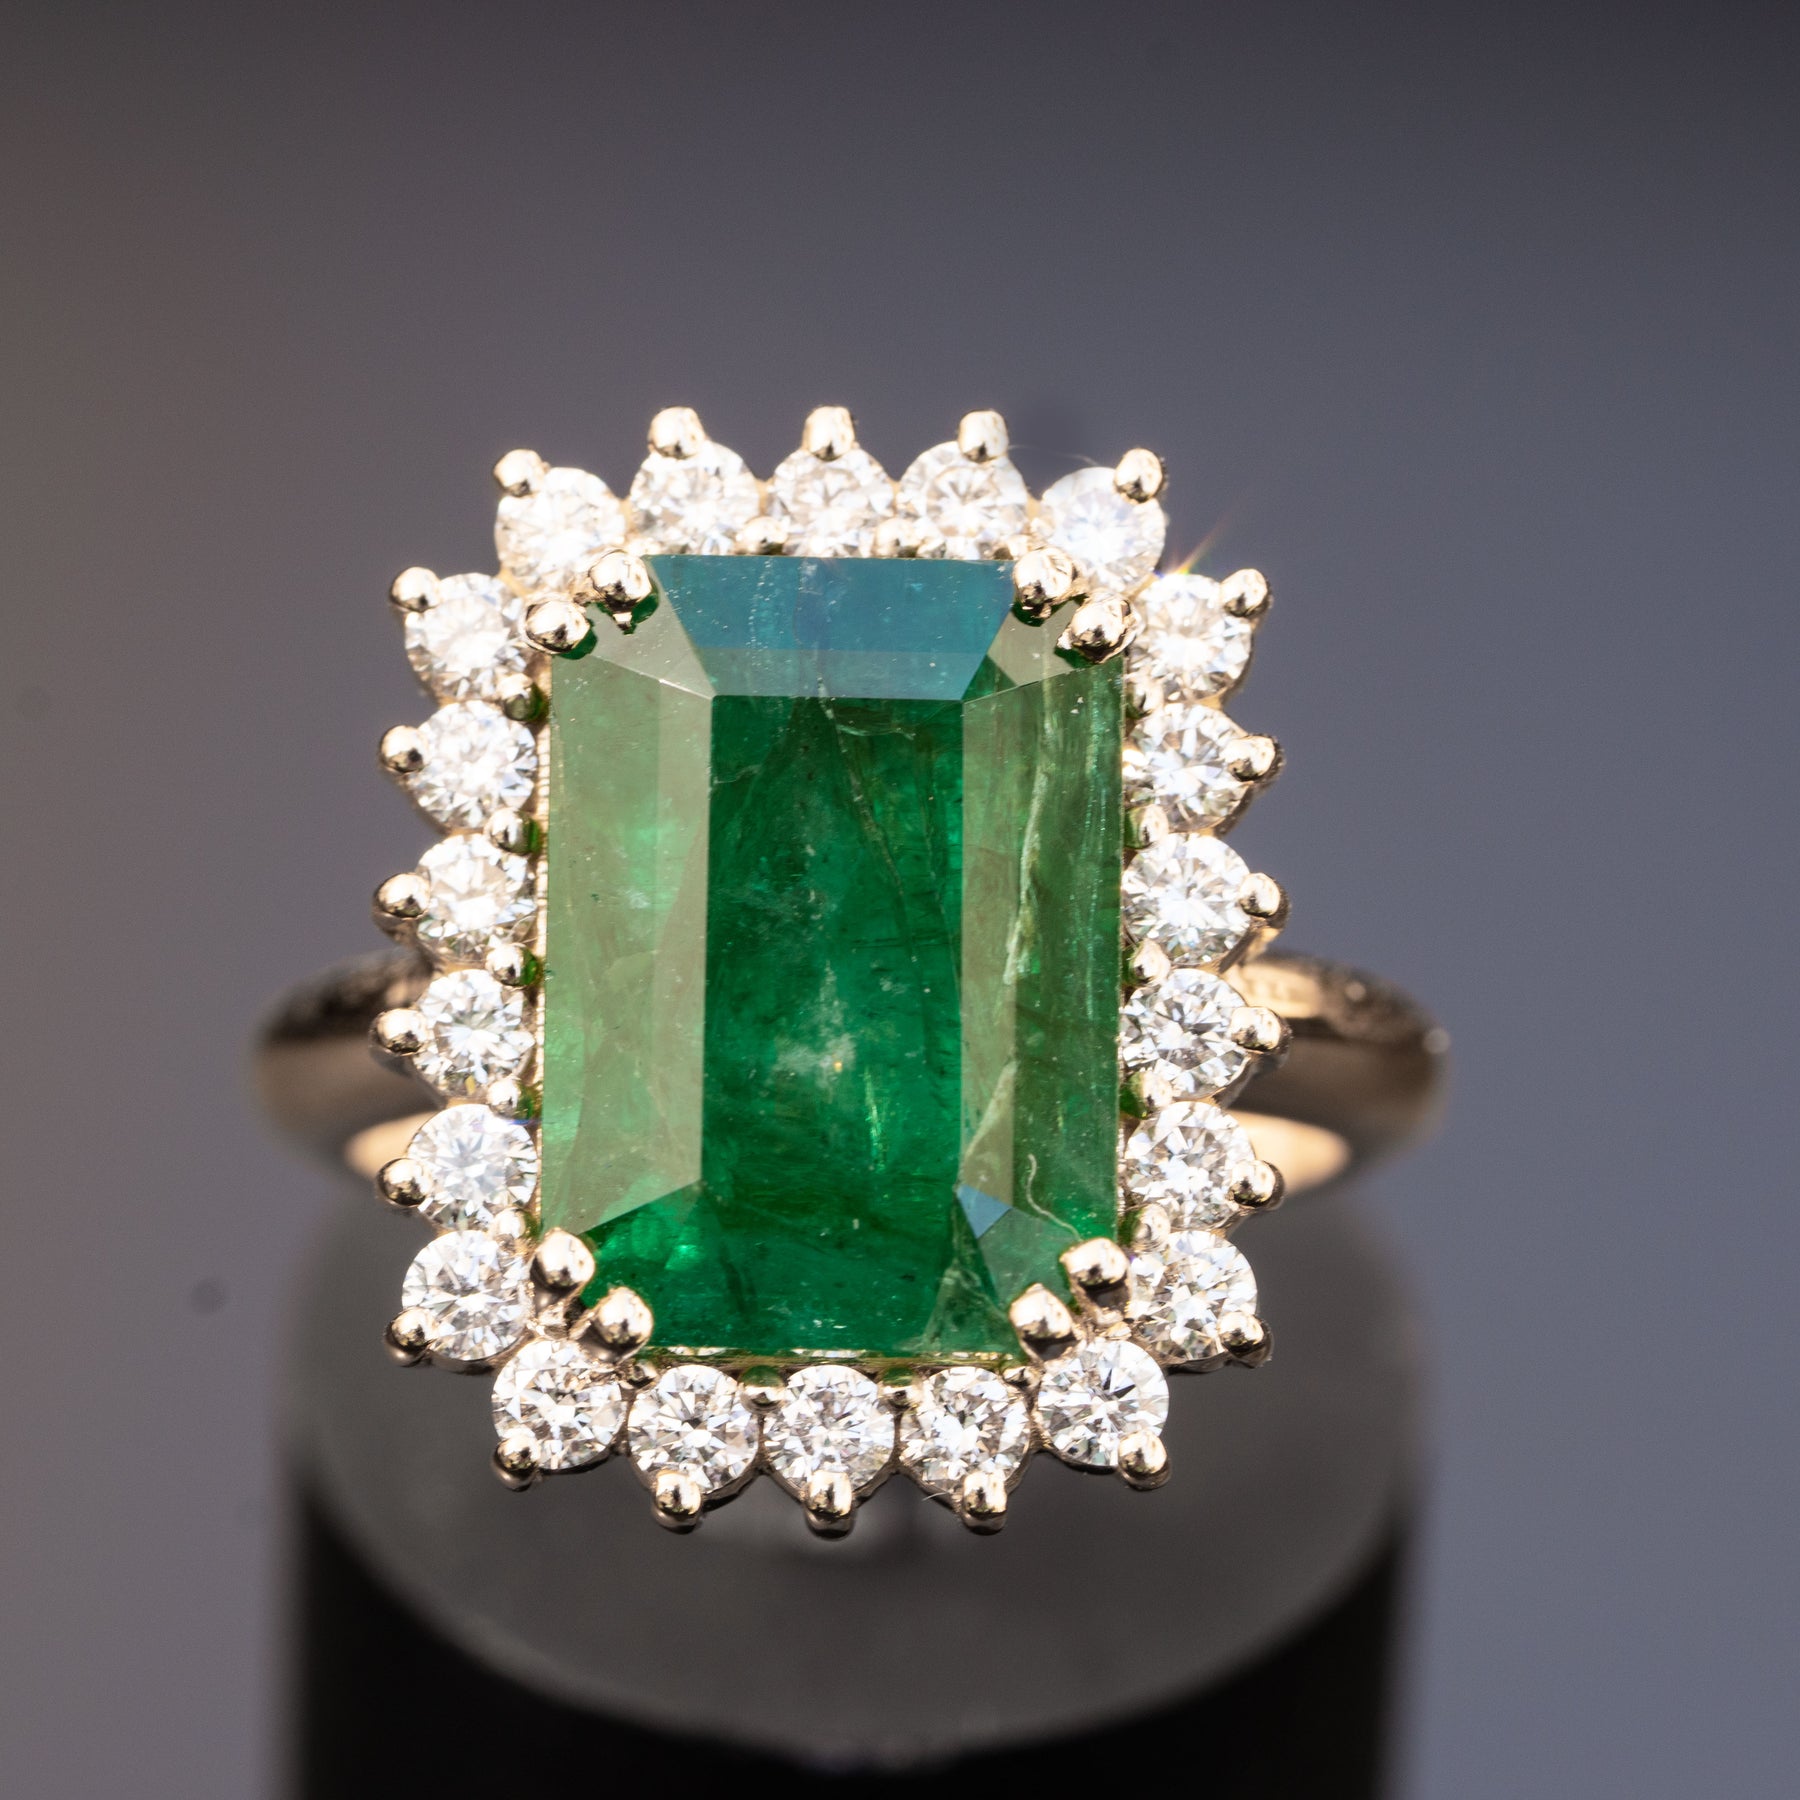 Art Deco 3Ct Emerald Green Oval Cut Antique Engagement Ring 14K Yellow Gold  Over | eBay